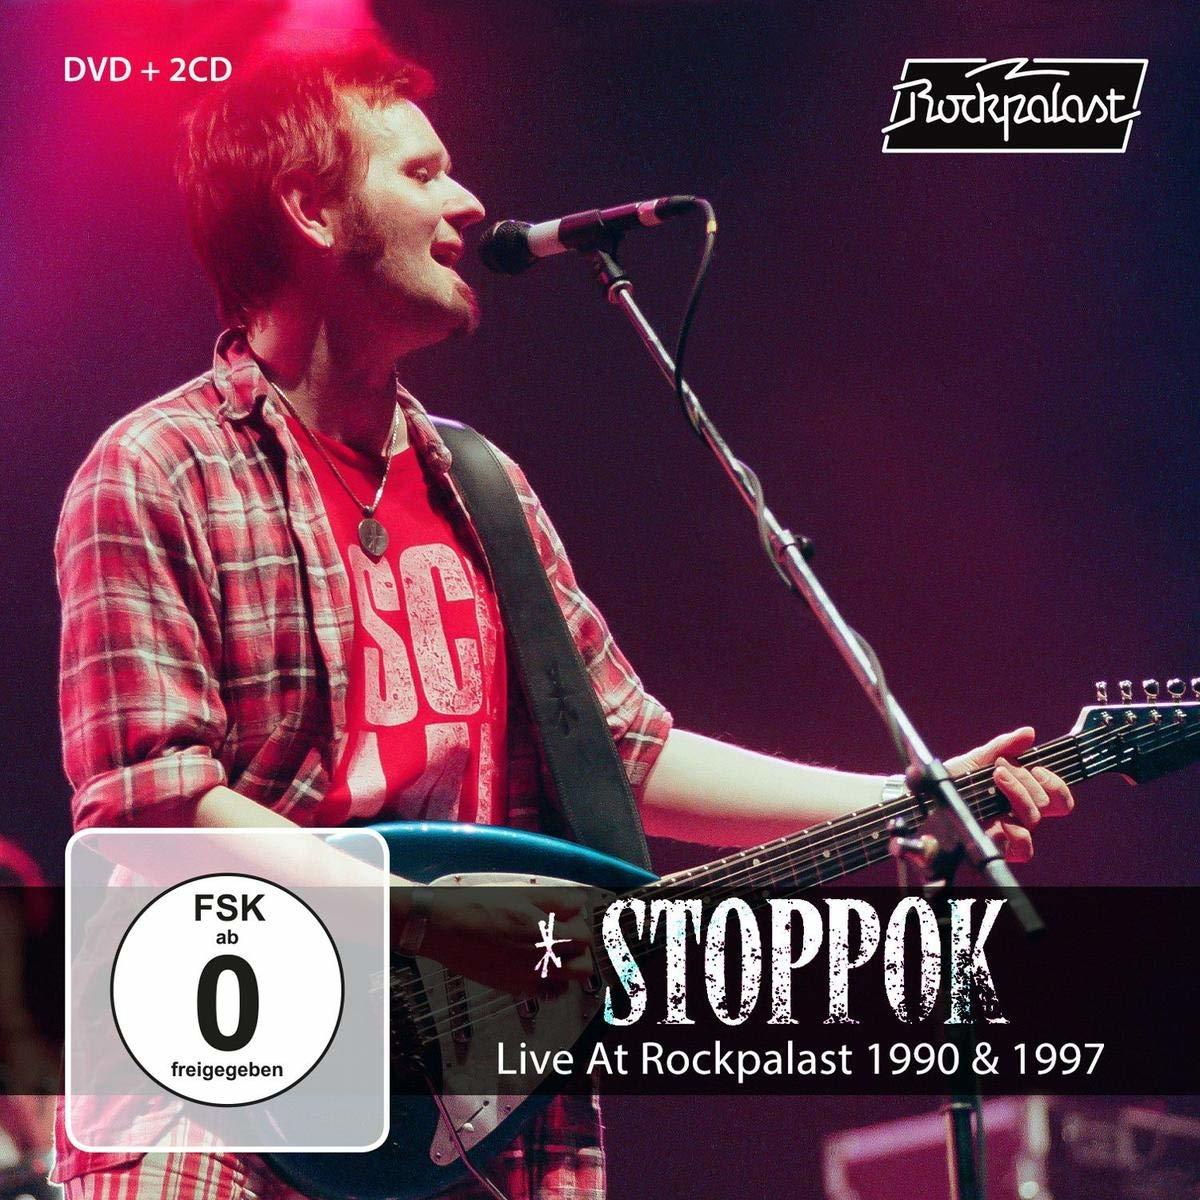 DVD At 1997 Live 1990 & STOPPOK - (2CD,DVD) Video) (CD + Rockpalast -